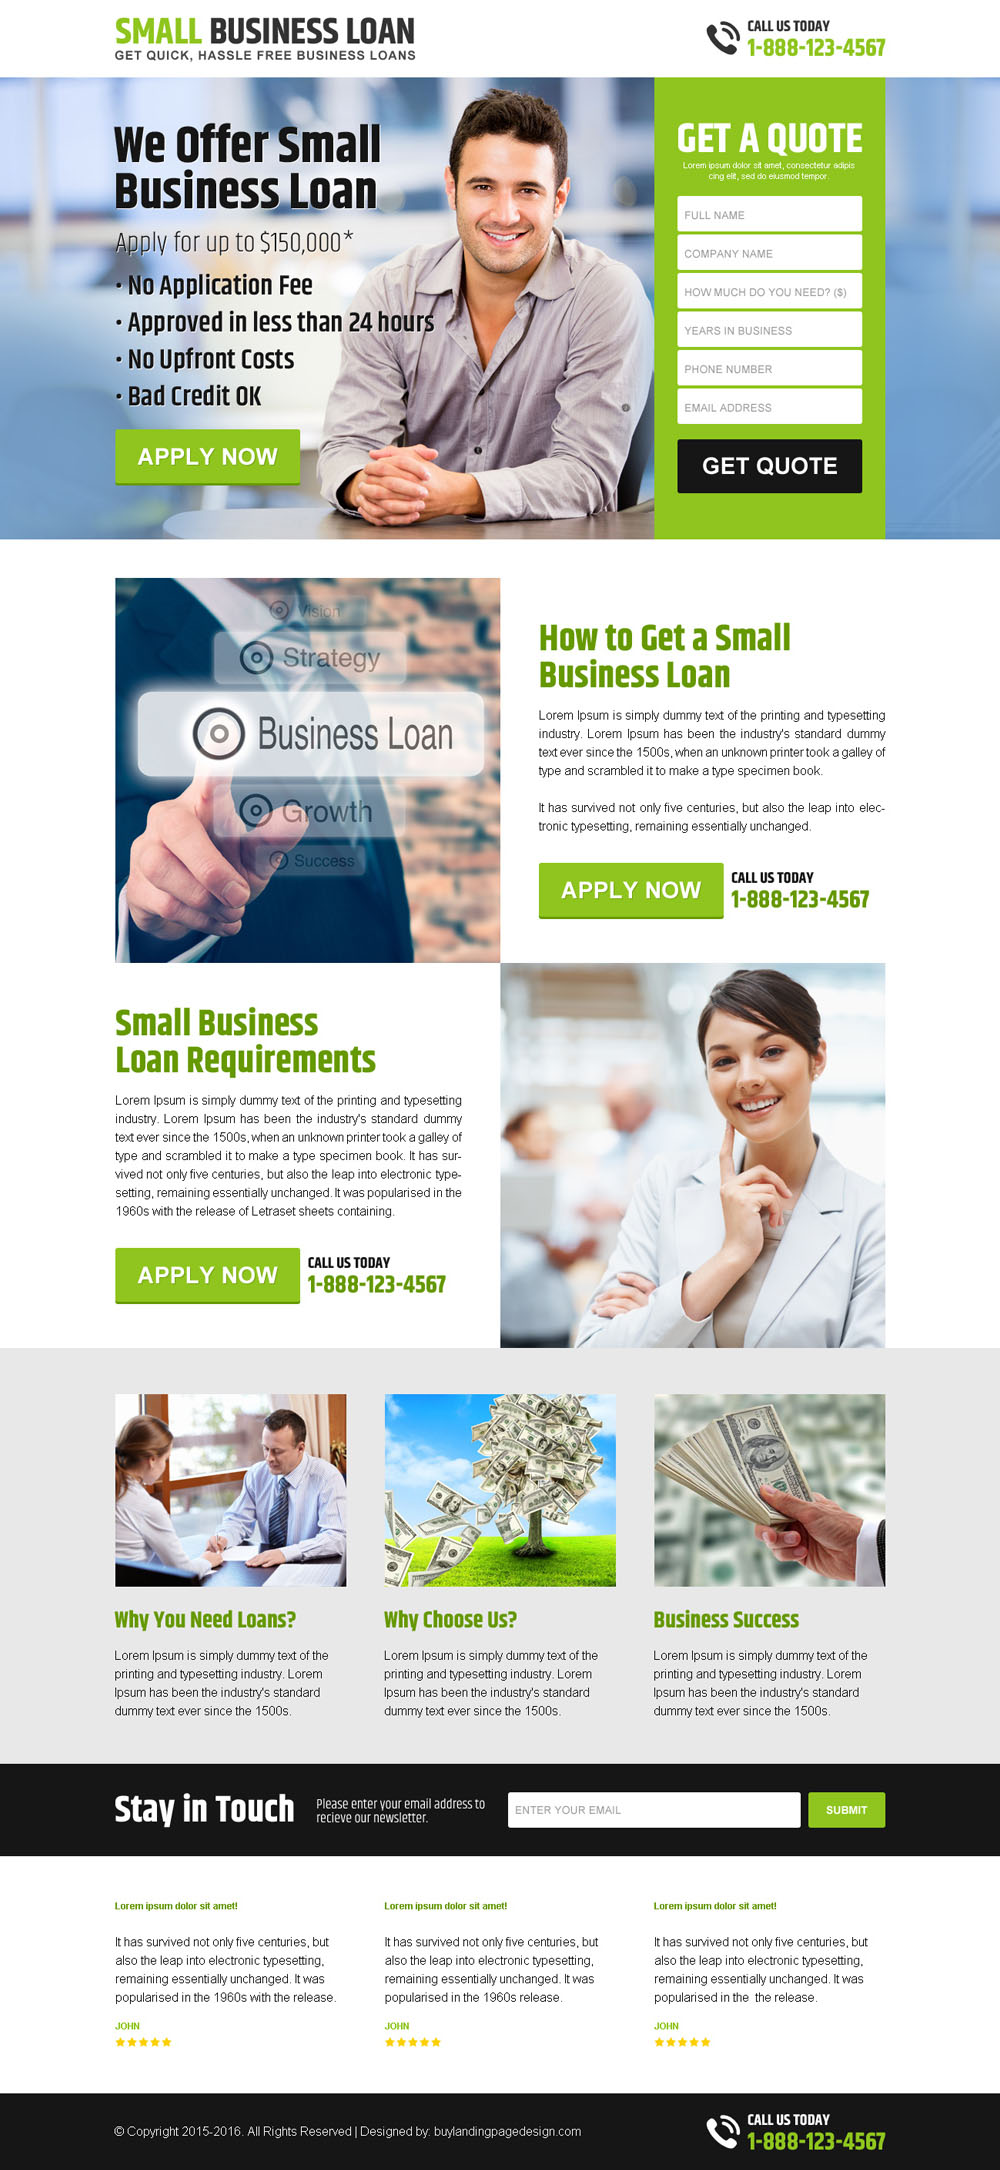 hassle-free-small-business-loan-lead-capture-converting-landing-page-002